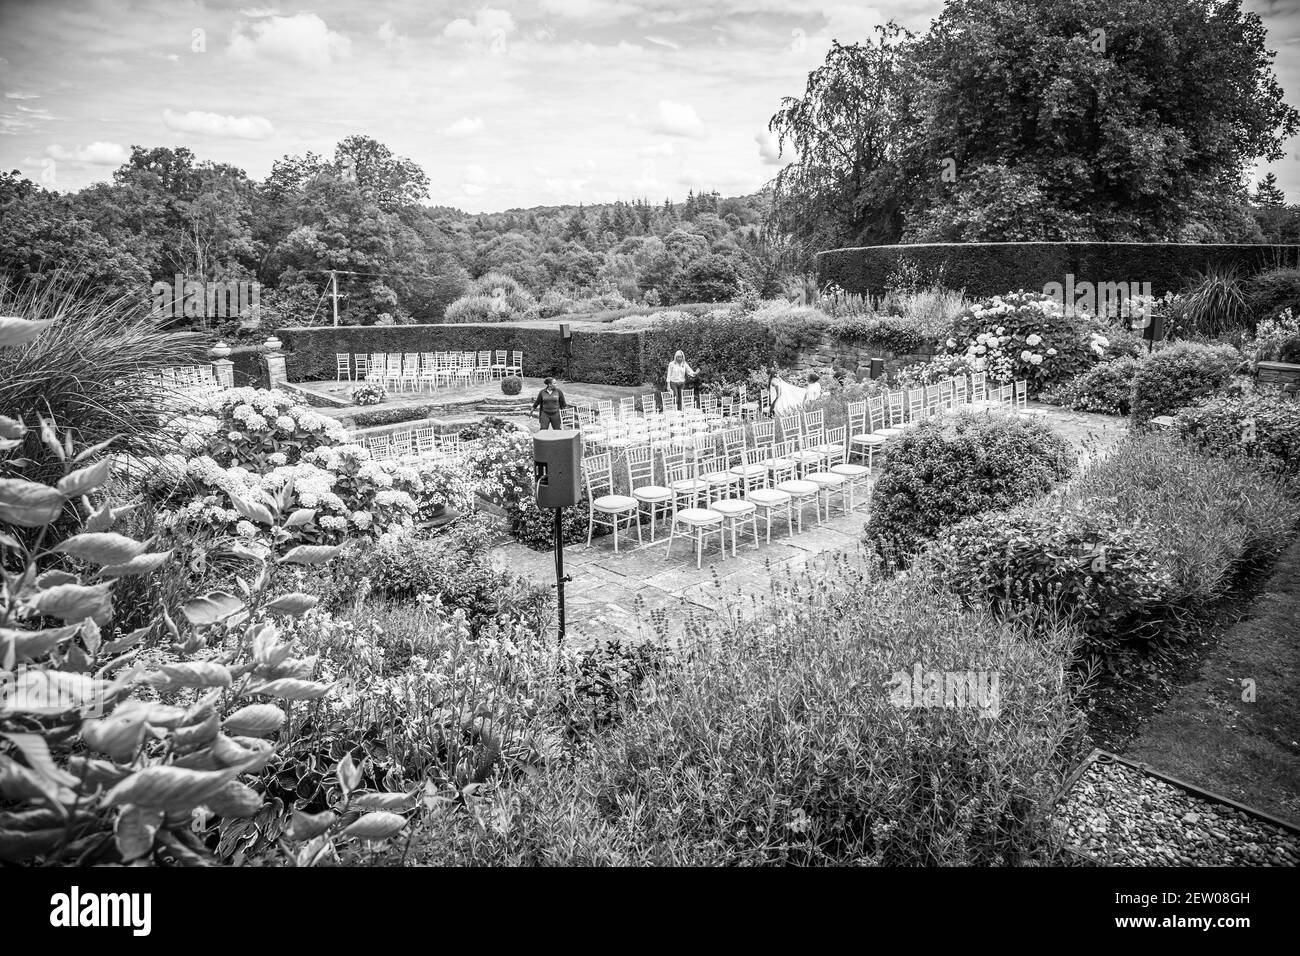 Seating set-up in the sunken garden of a mansion house ready for the guests to arrive. Stock Photo